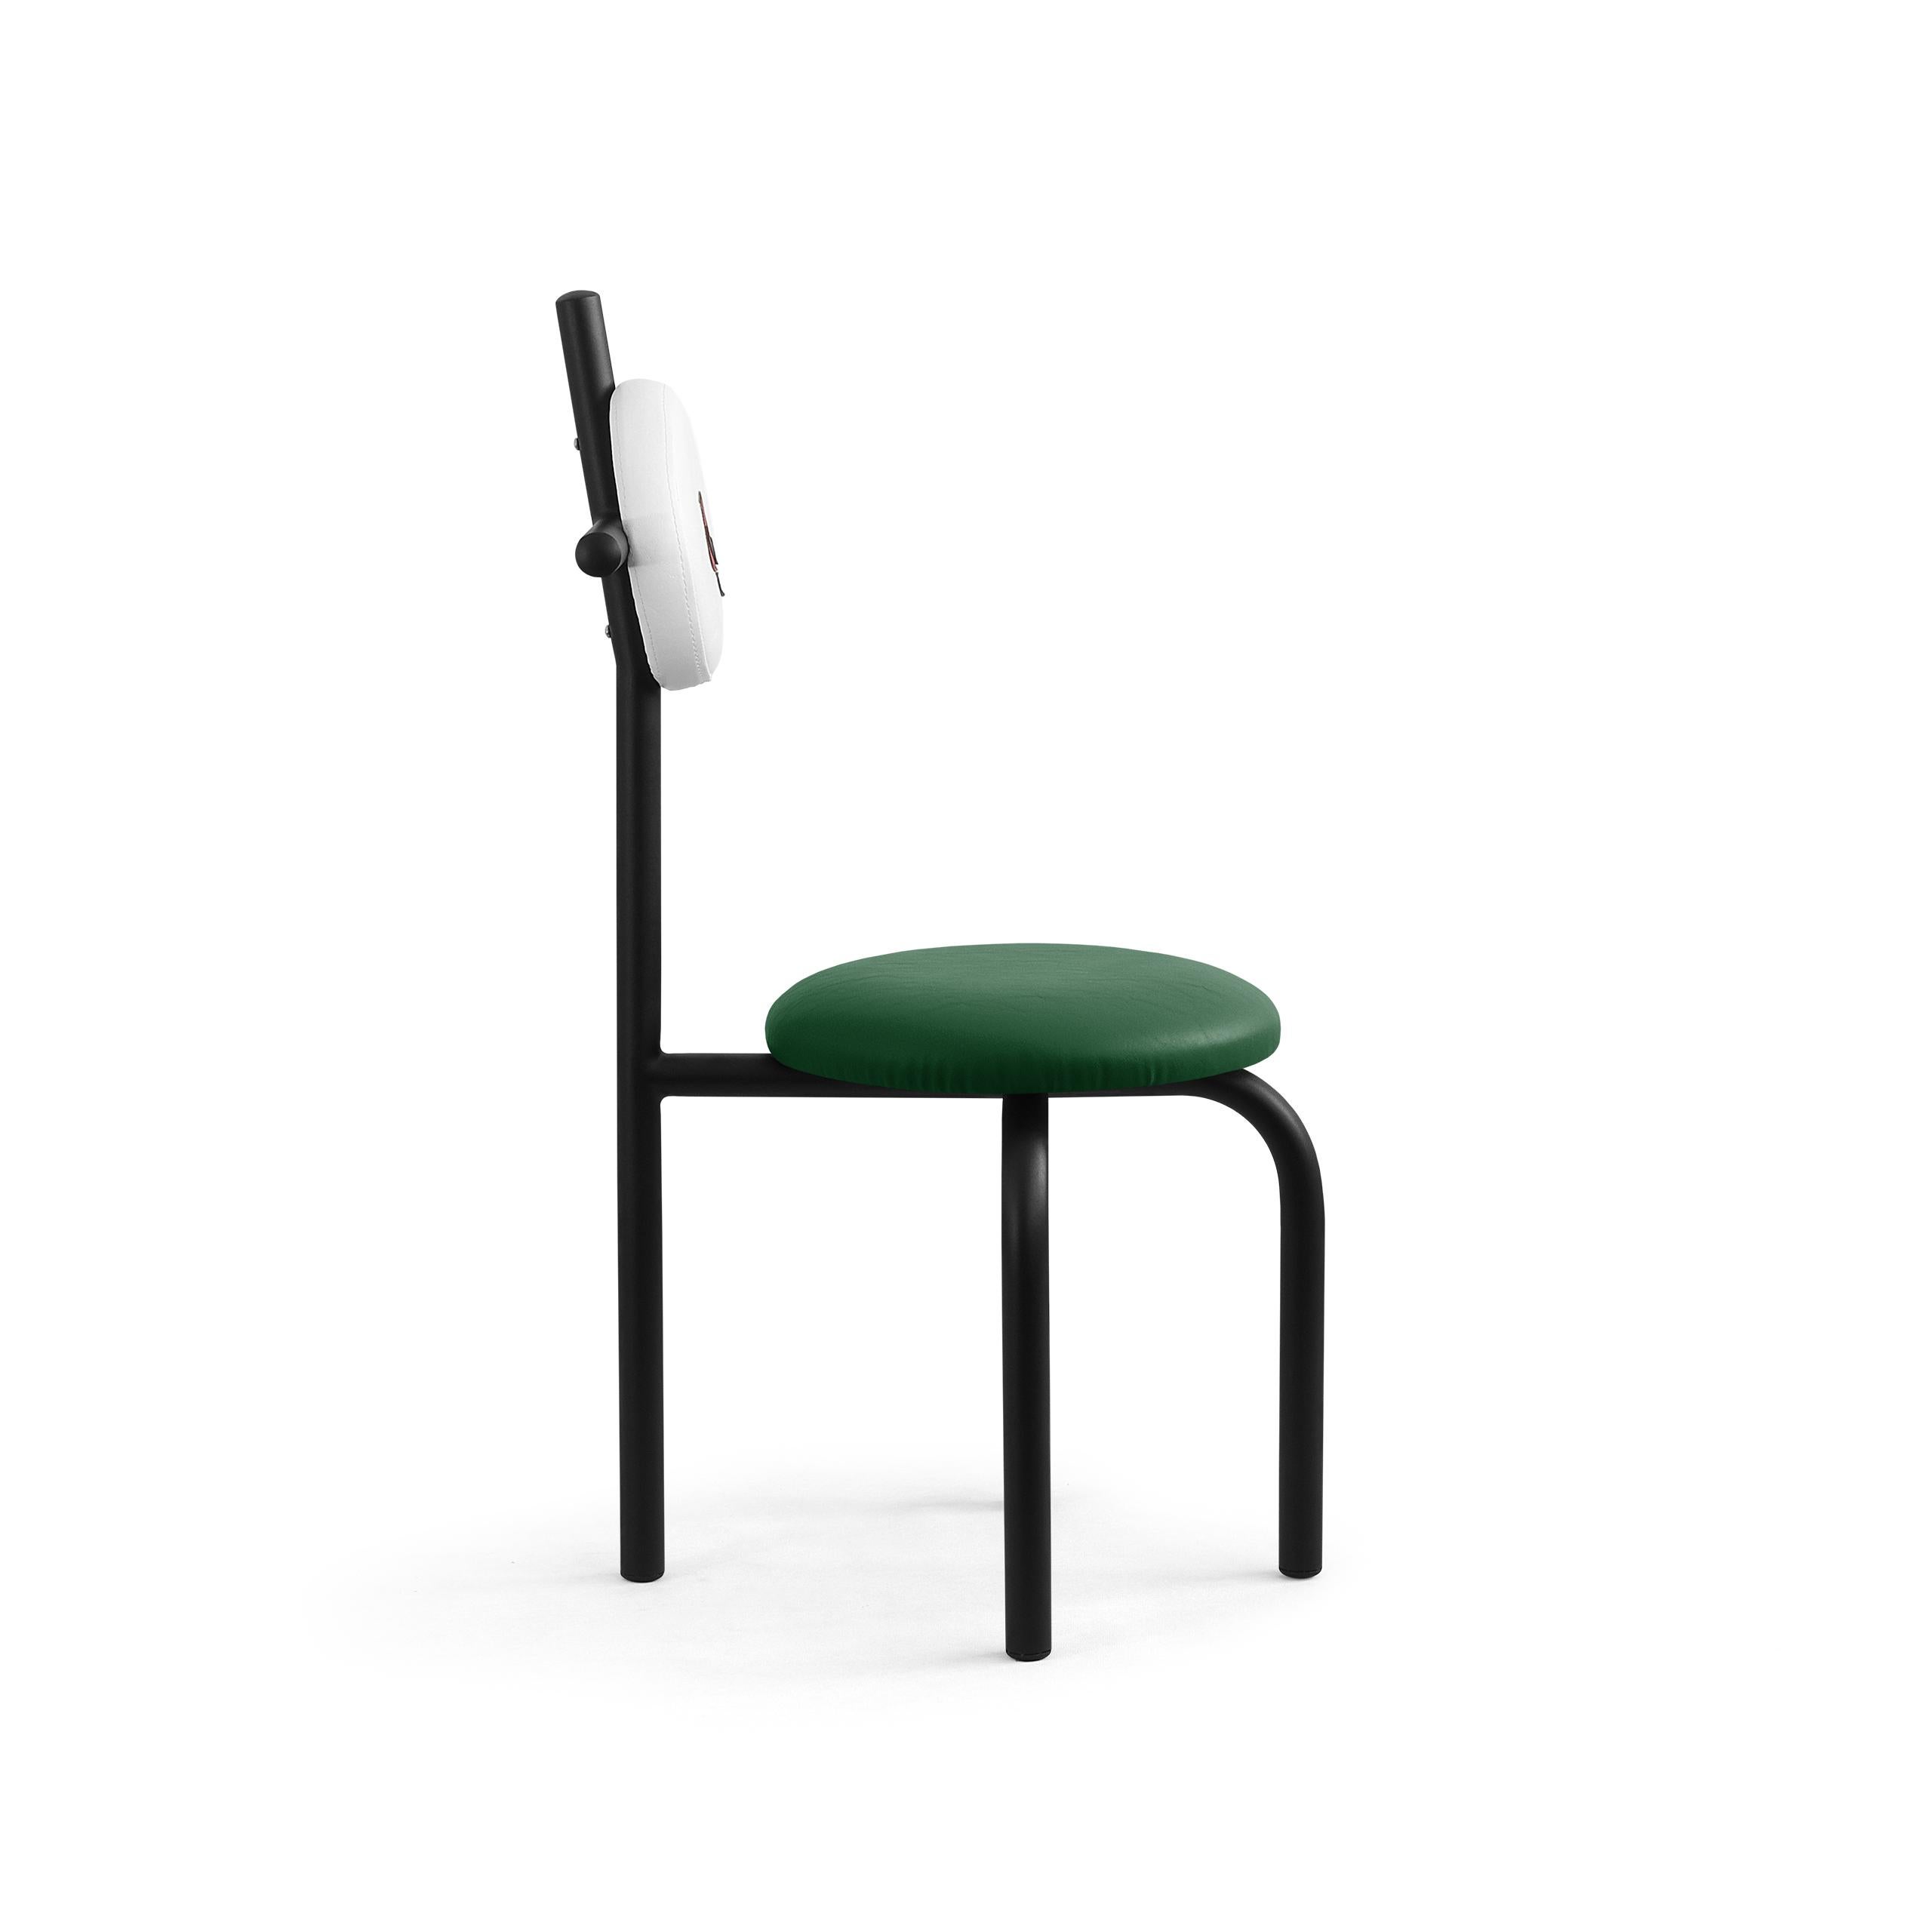 Brazilian PK16 Impermeable Chair, Green Seat & Carbon Steel Structure by Paulo Kobylka For Sale